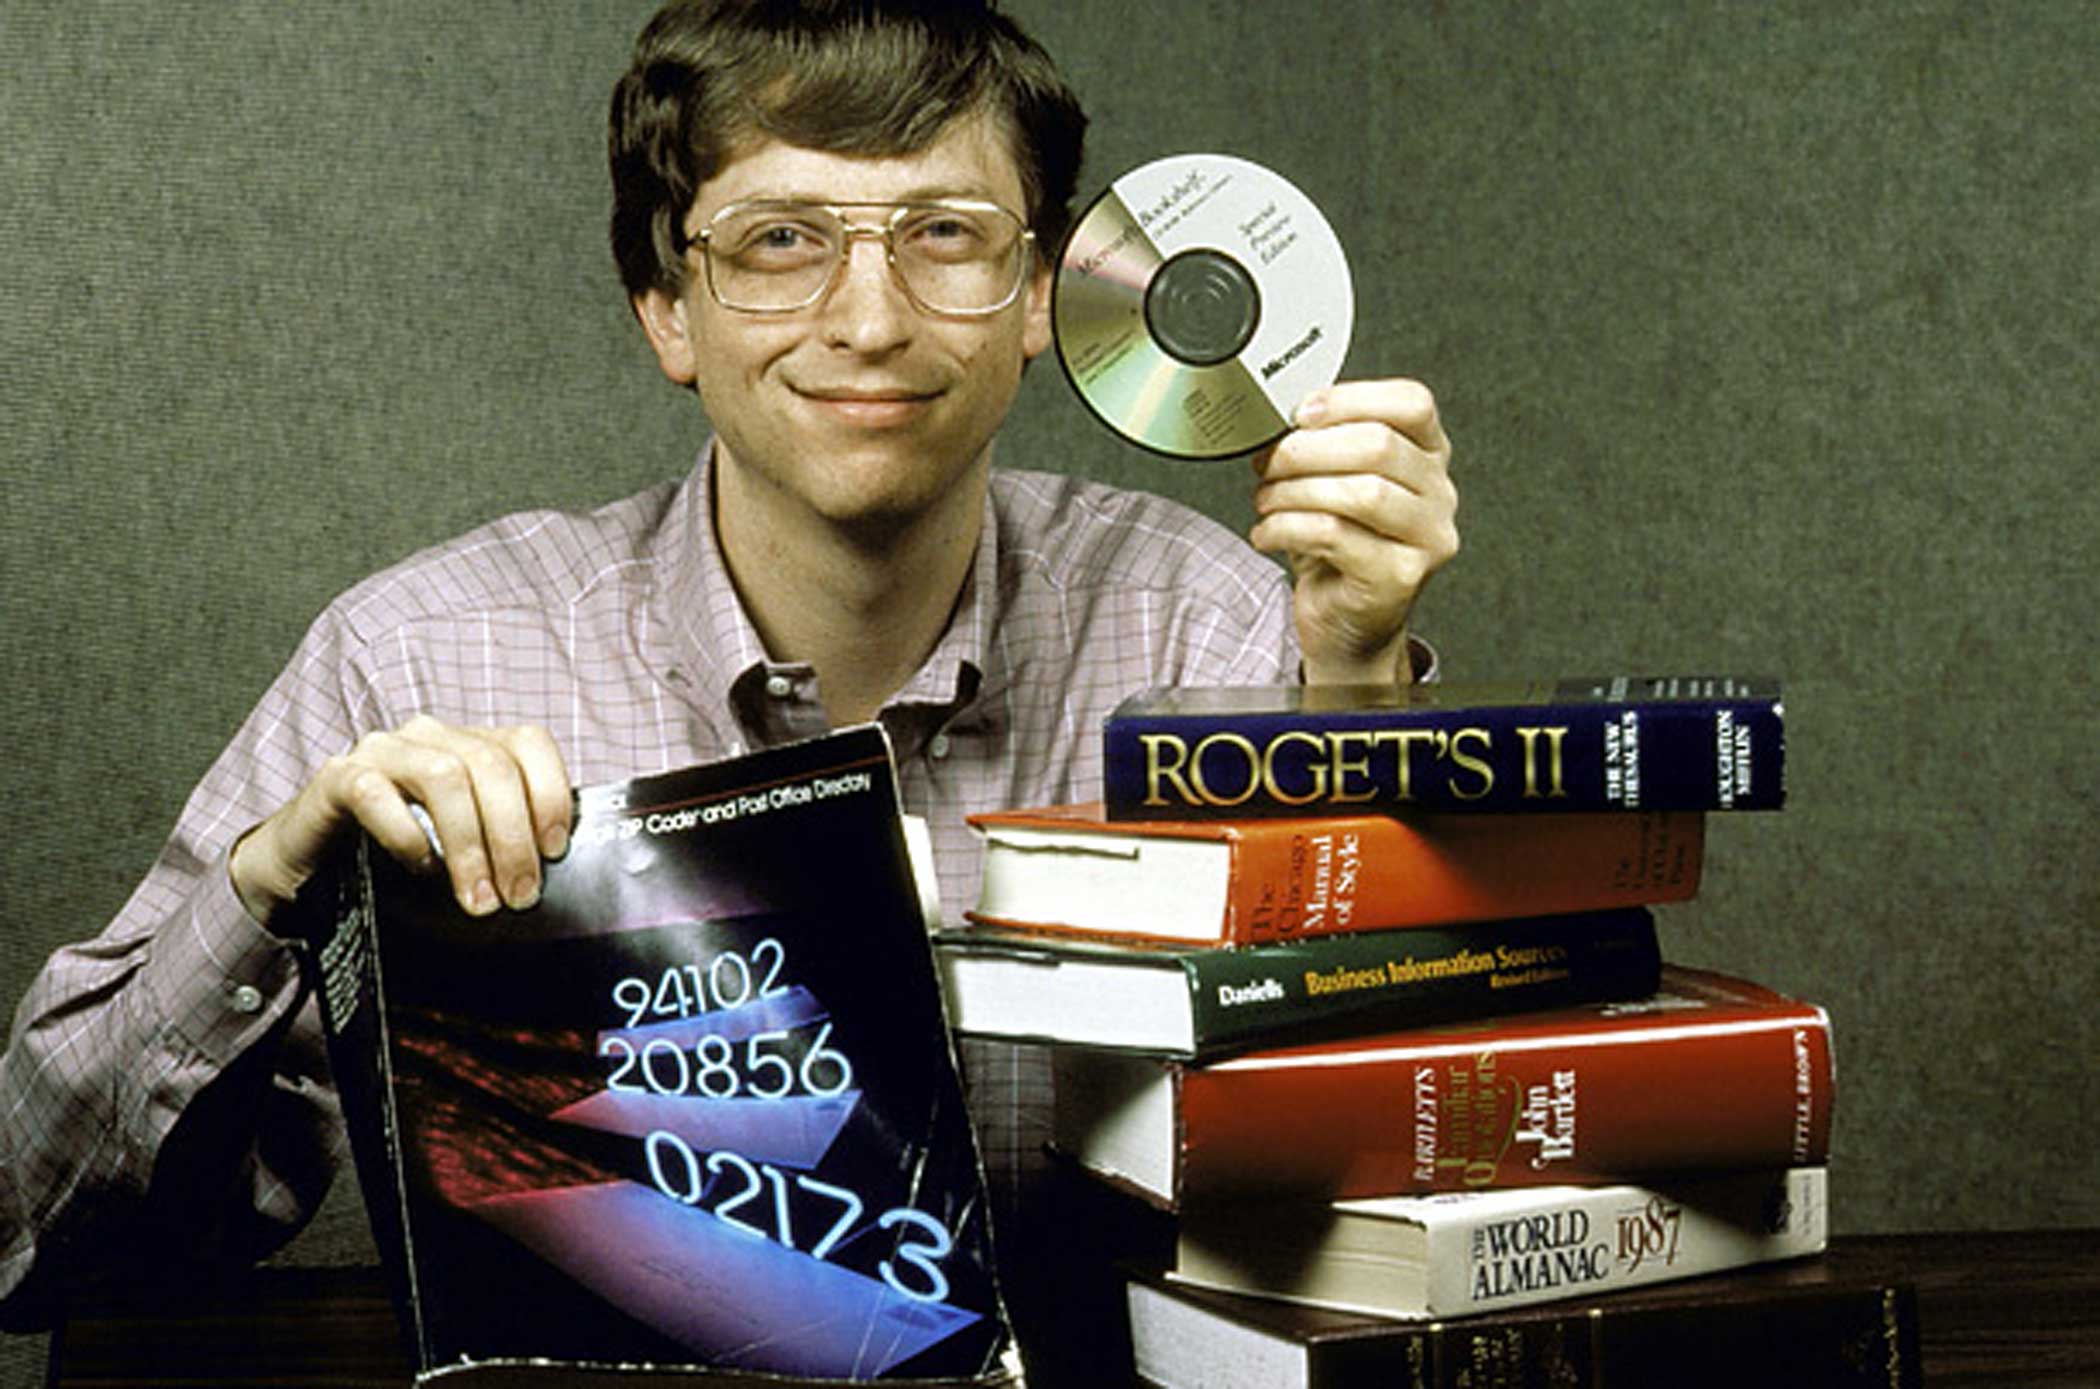 Microsoft Chairman Bill Gates, behind a pile of books, holds up Bookshelf, a new compact disc for computers which holds all the information contained in the books pictured.  (Photo by Doug Wilson//Time Life Pictures/Getty Images)